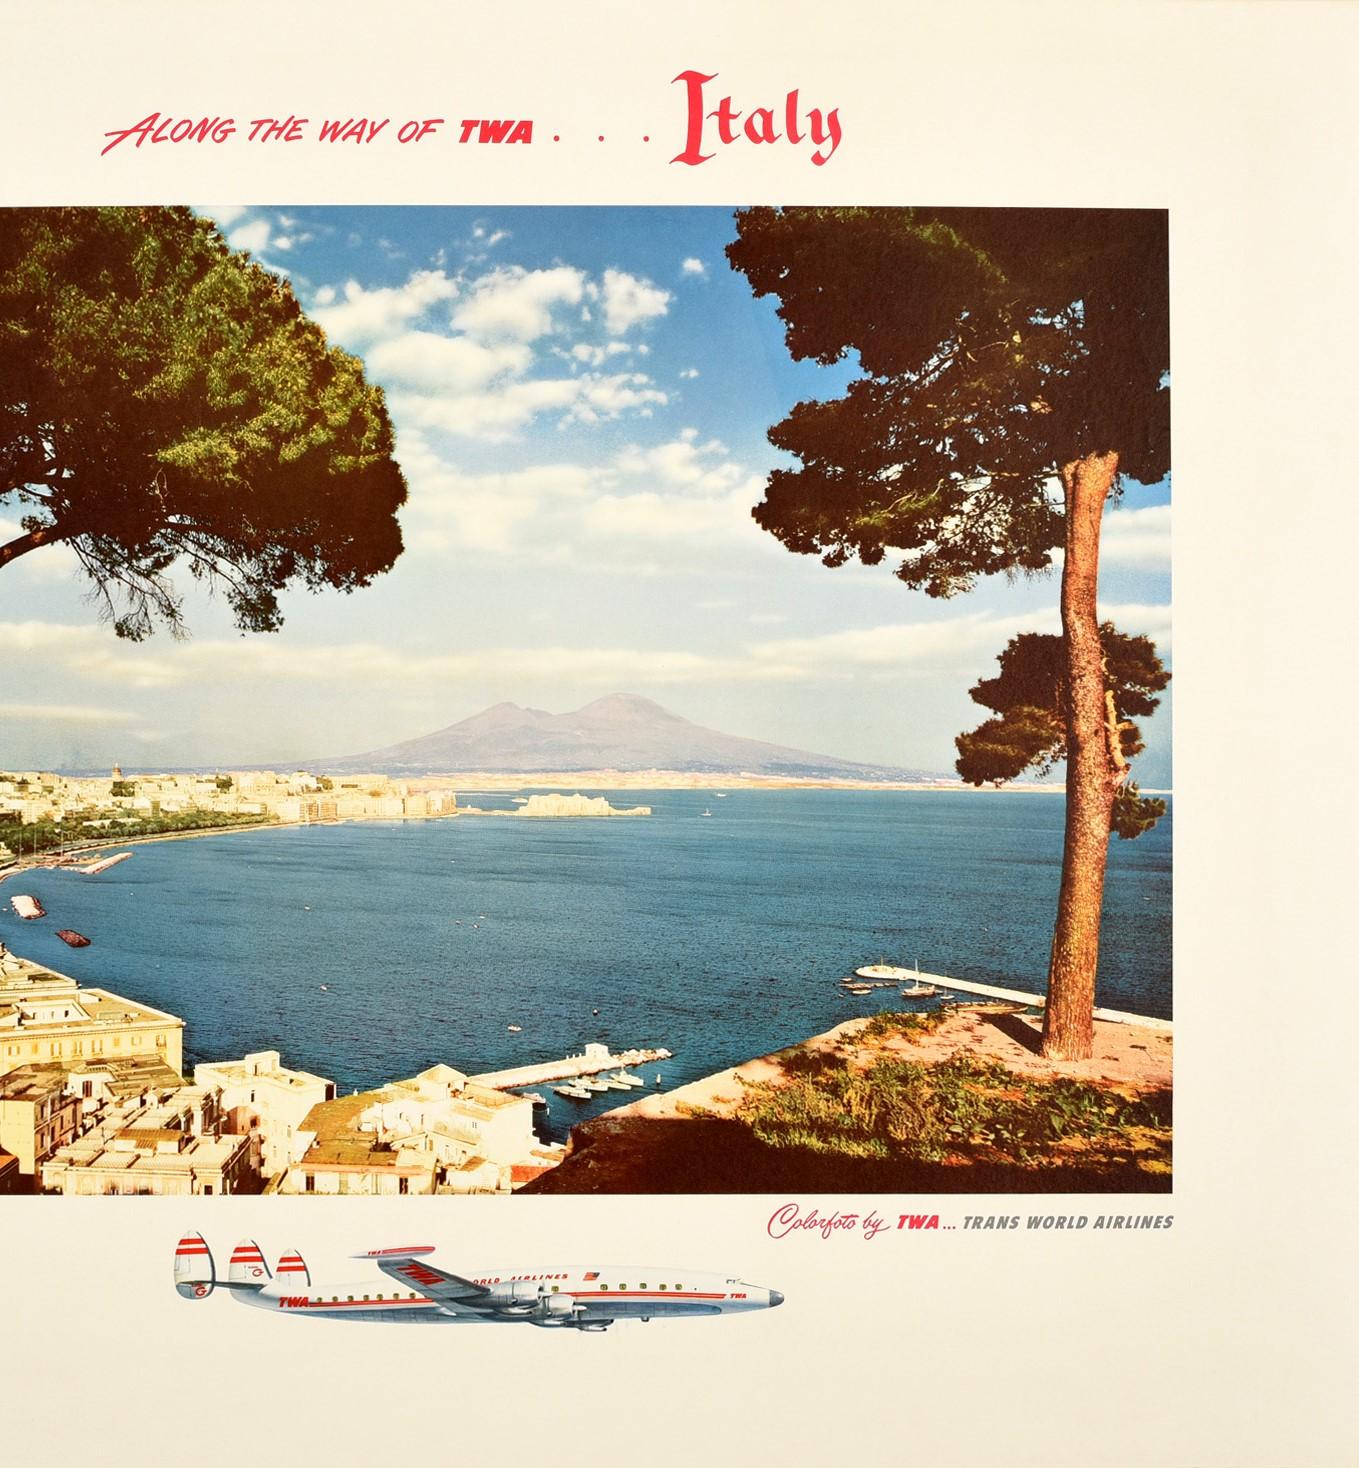 Original vintage travel advertising poster - Along the way of TWA ... Italy The Bay of Naples Trans World Airlines - featuring a view over the Gulf of Naples towards Mount Vesuvius with the town along the peninsula, boats in the harbour on the calm